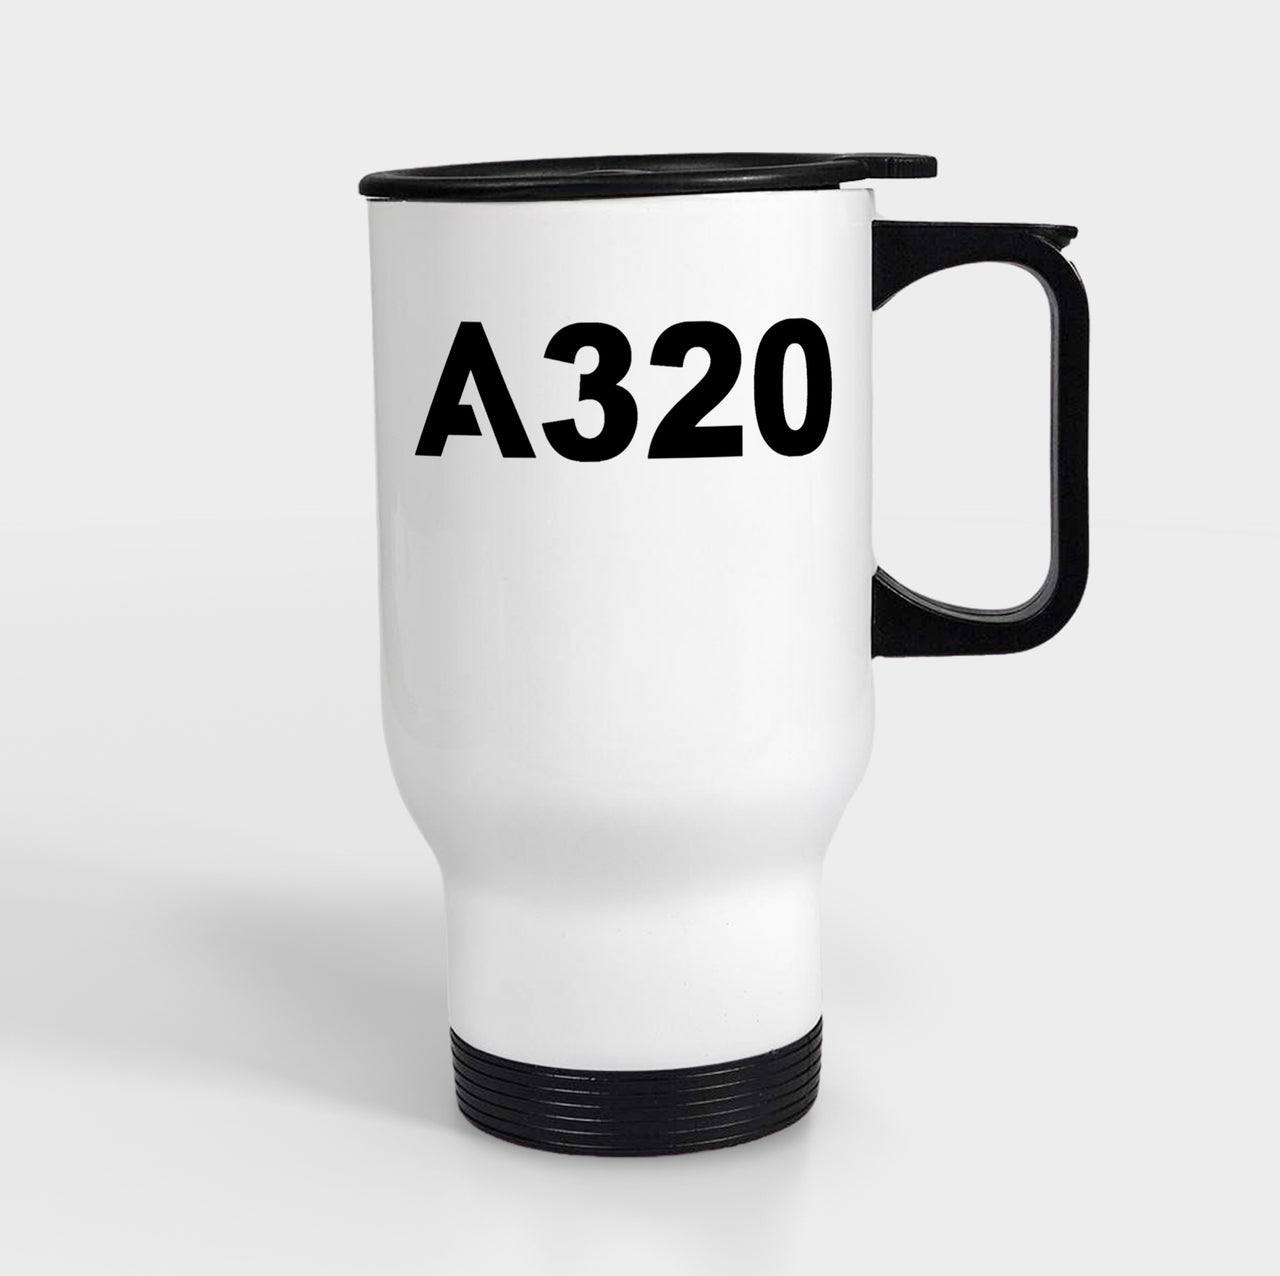 A320 Flat Text Designed Travel Mugs (With Holder)